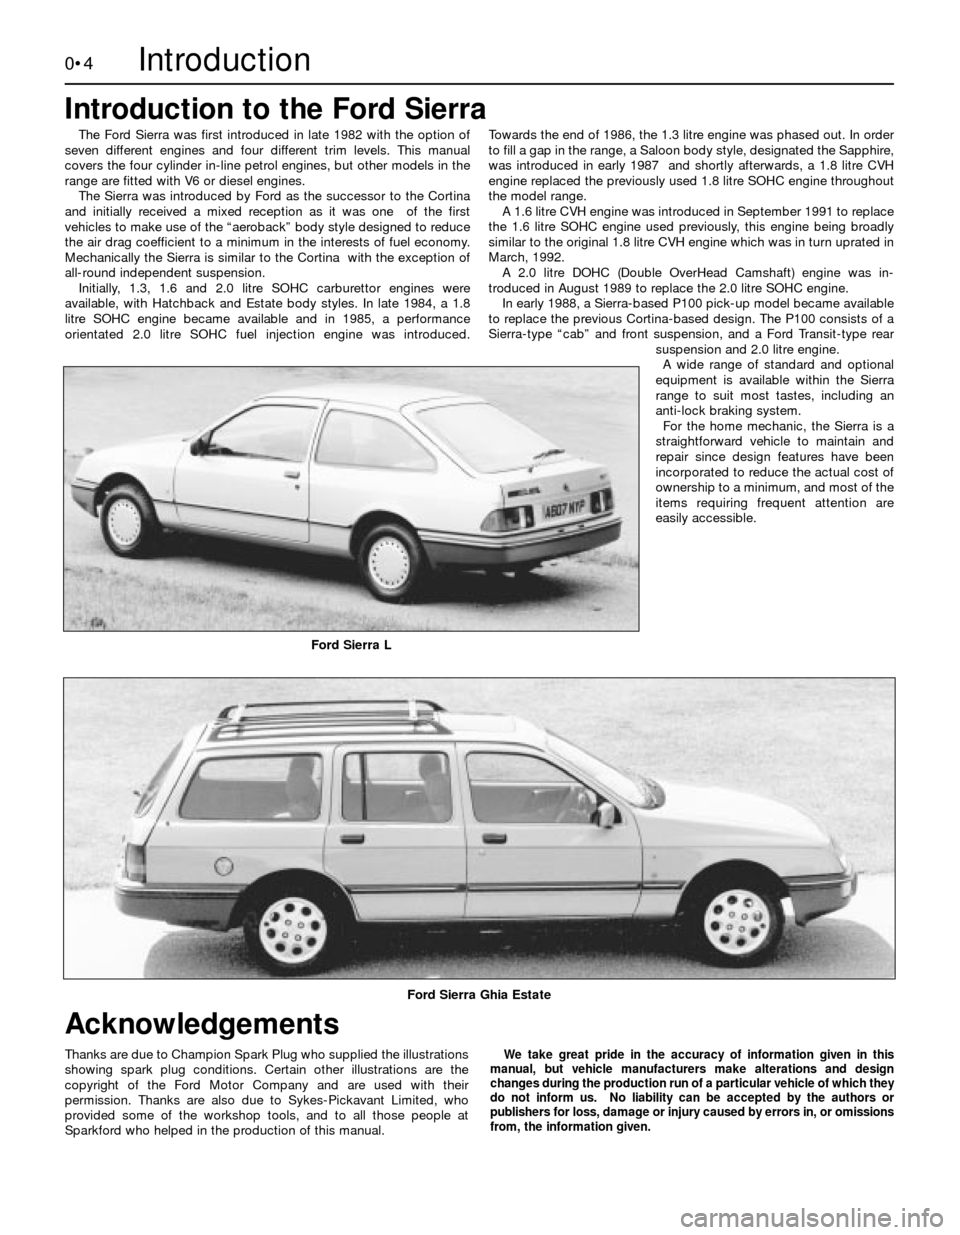 FORD SIERRA 1984 1.G Introduction Workshop Manual 0•4
The Ford Sierra was first introduced in late 1982 with the option of
seven different engines and four different trim levels. This manual
covers the four cylinder in-line petrol engines, but othe